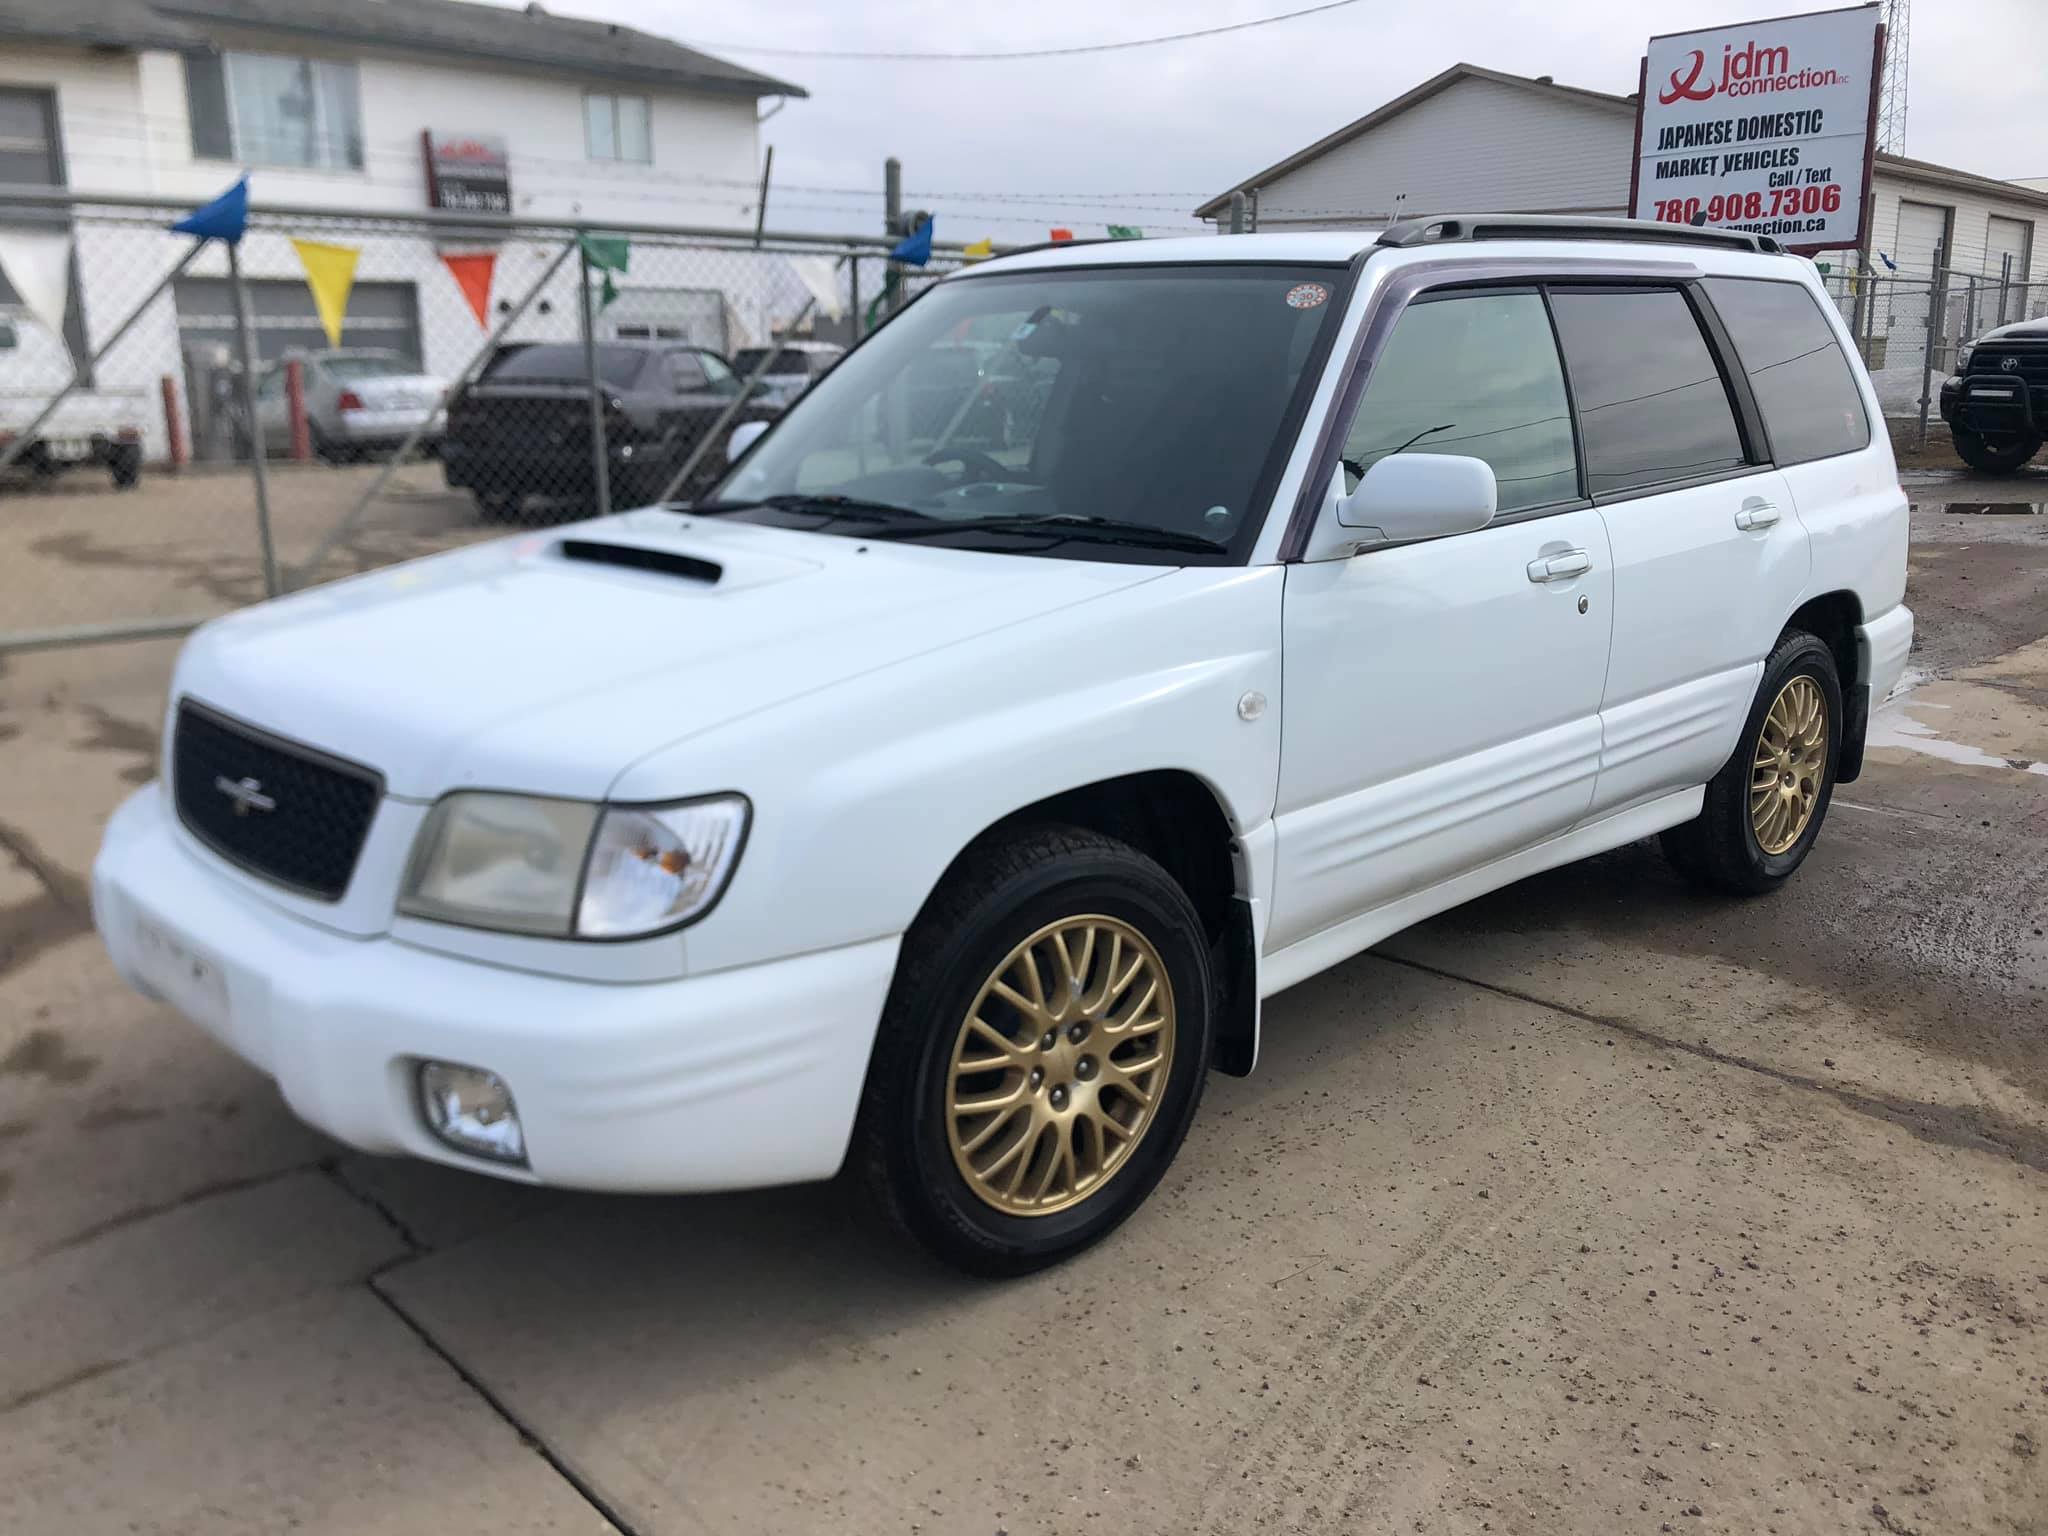 2000 Subaru Forester S/TB JDM Connection